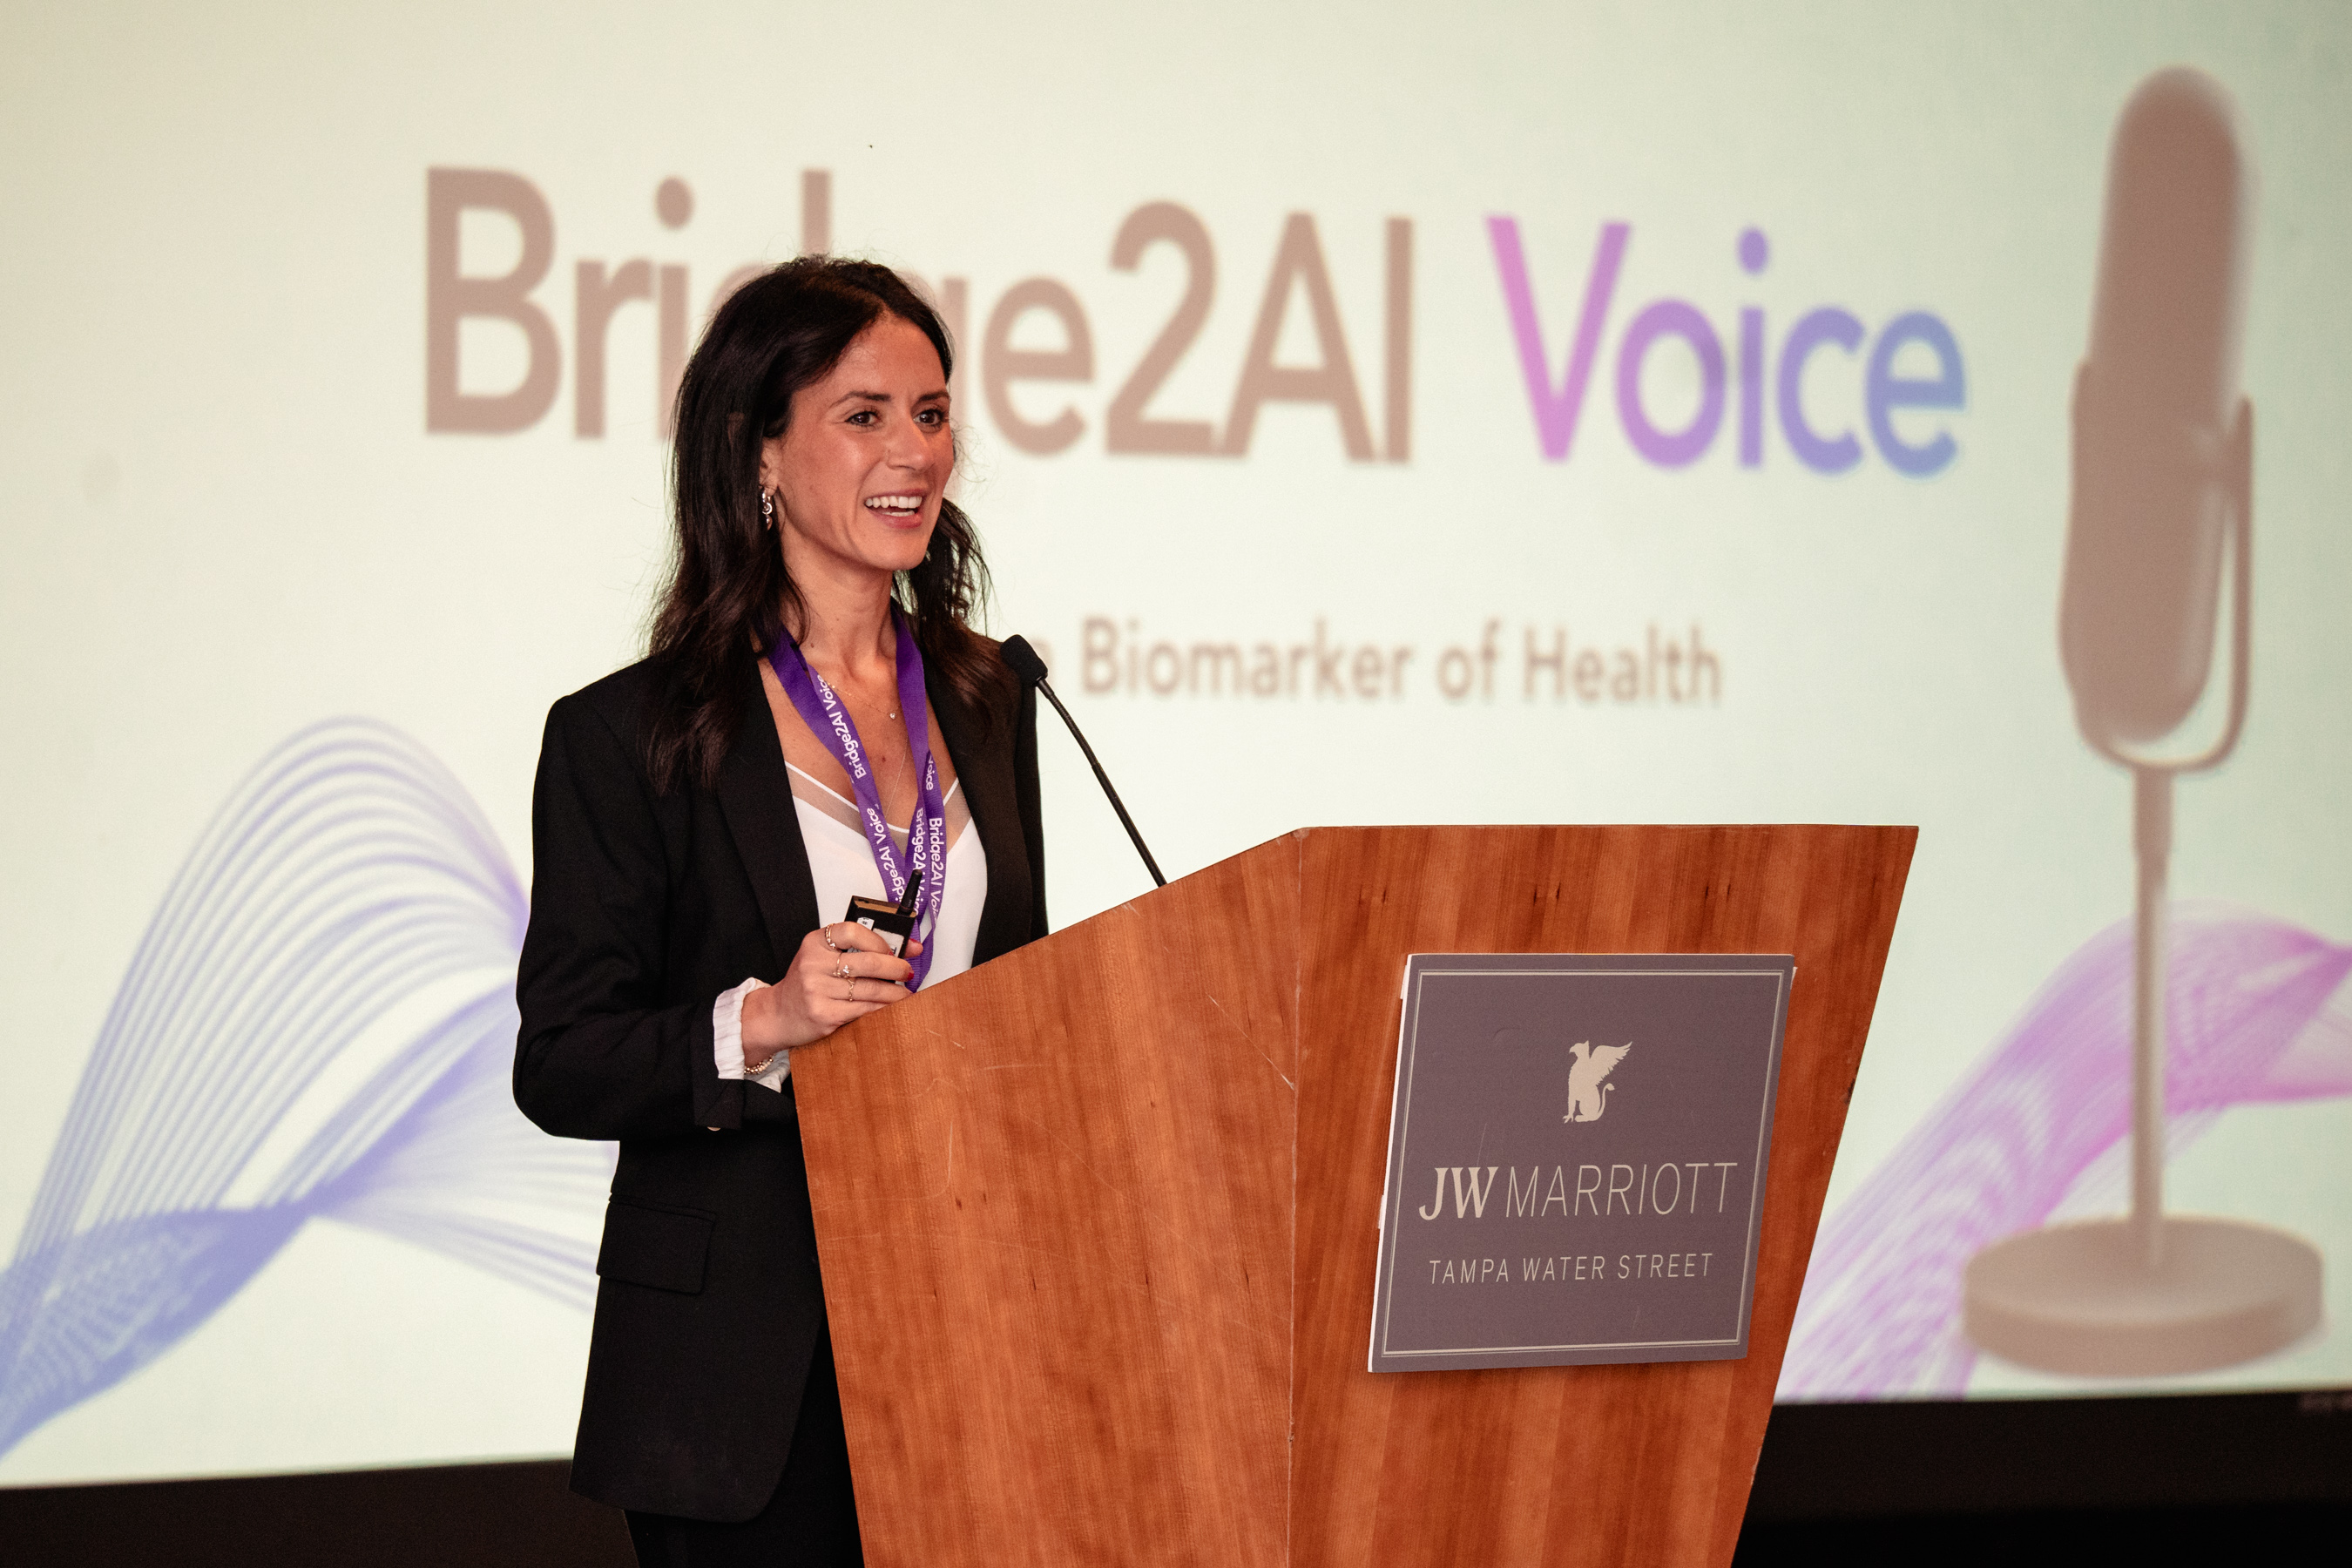 International conference in Tampa helps advance use of voice and AI in health care